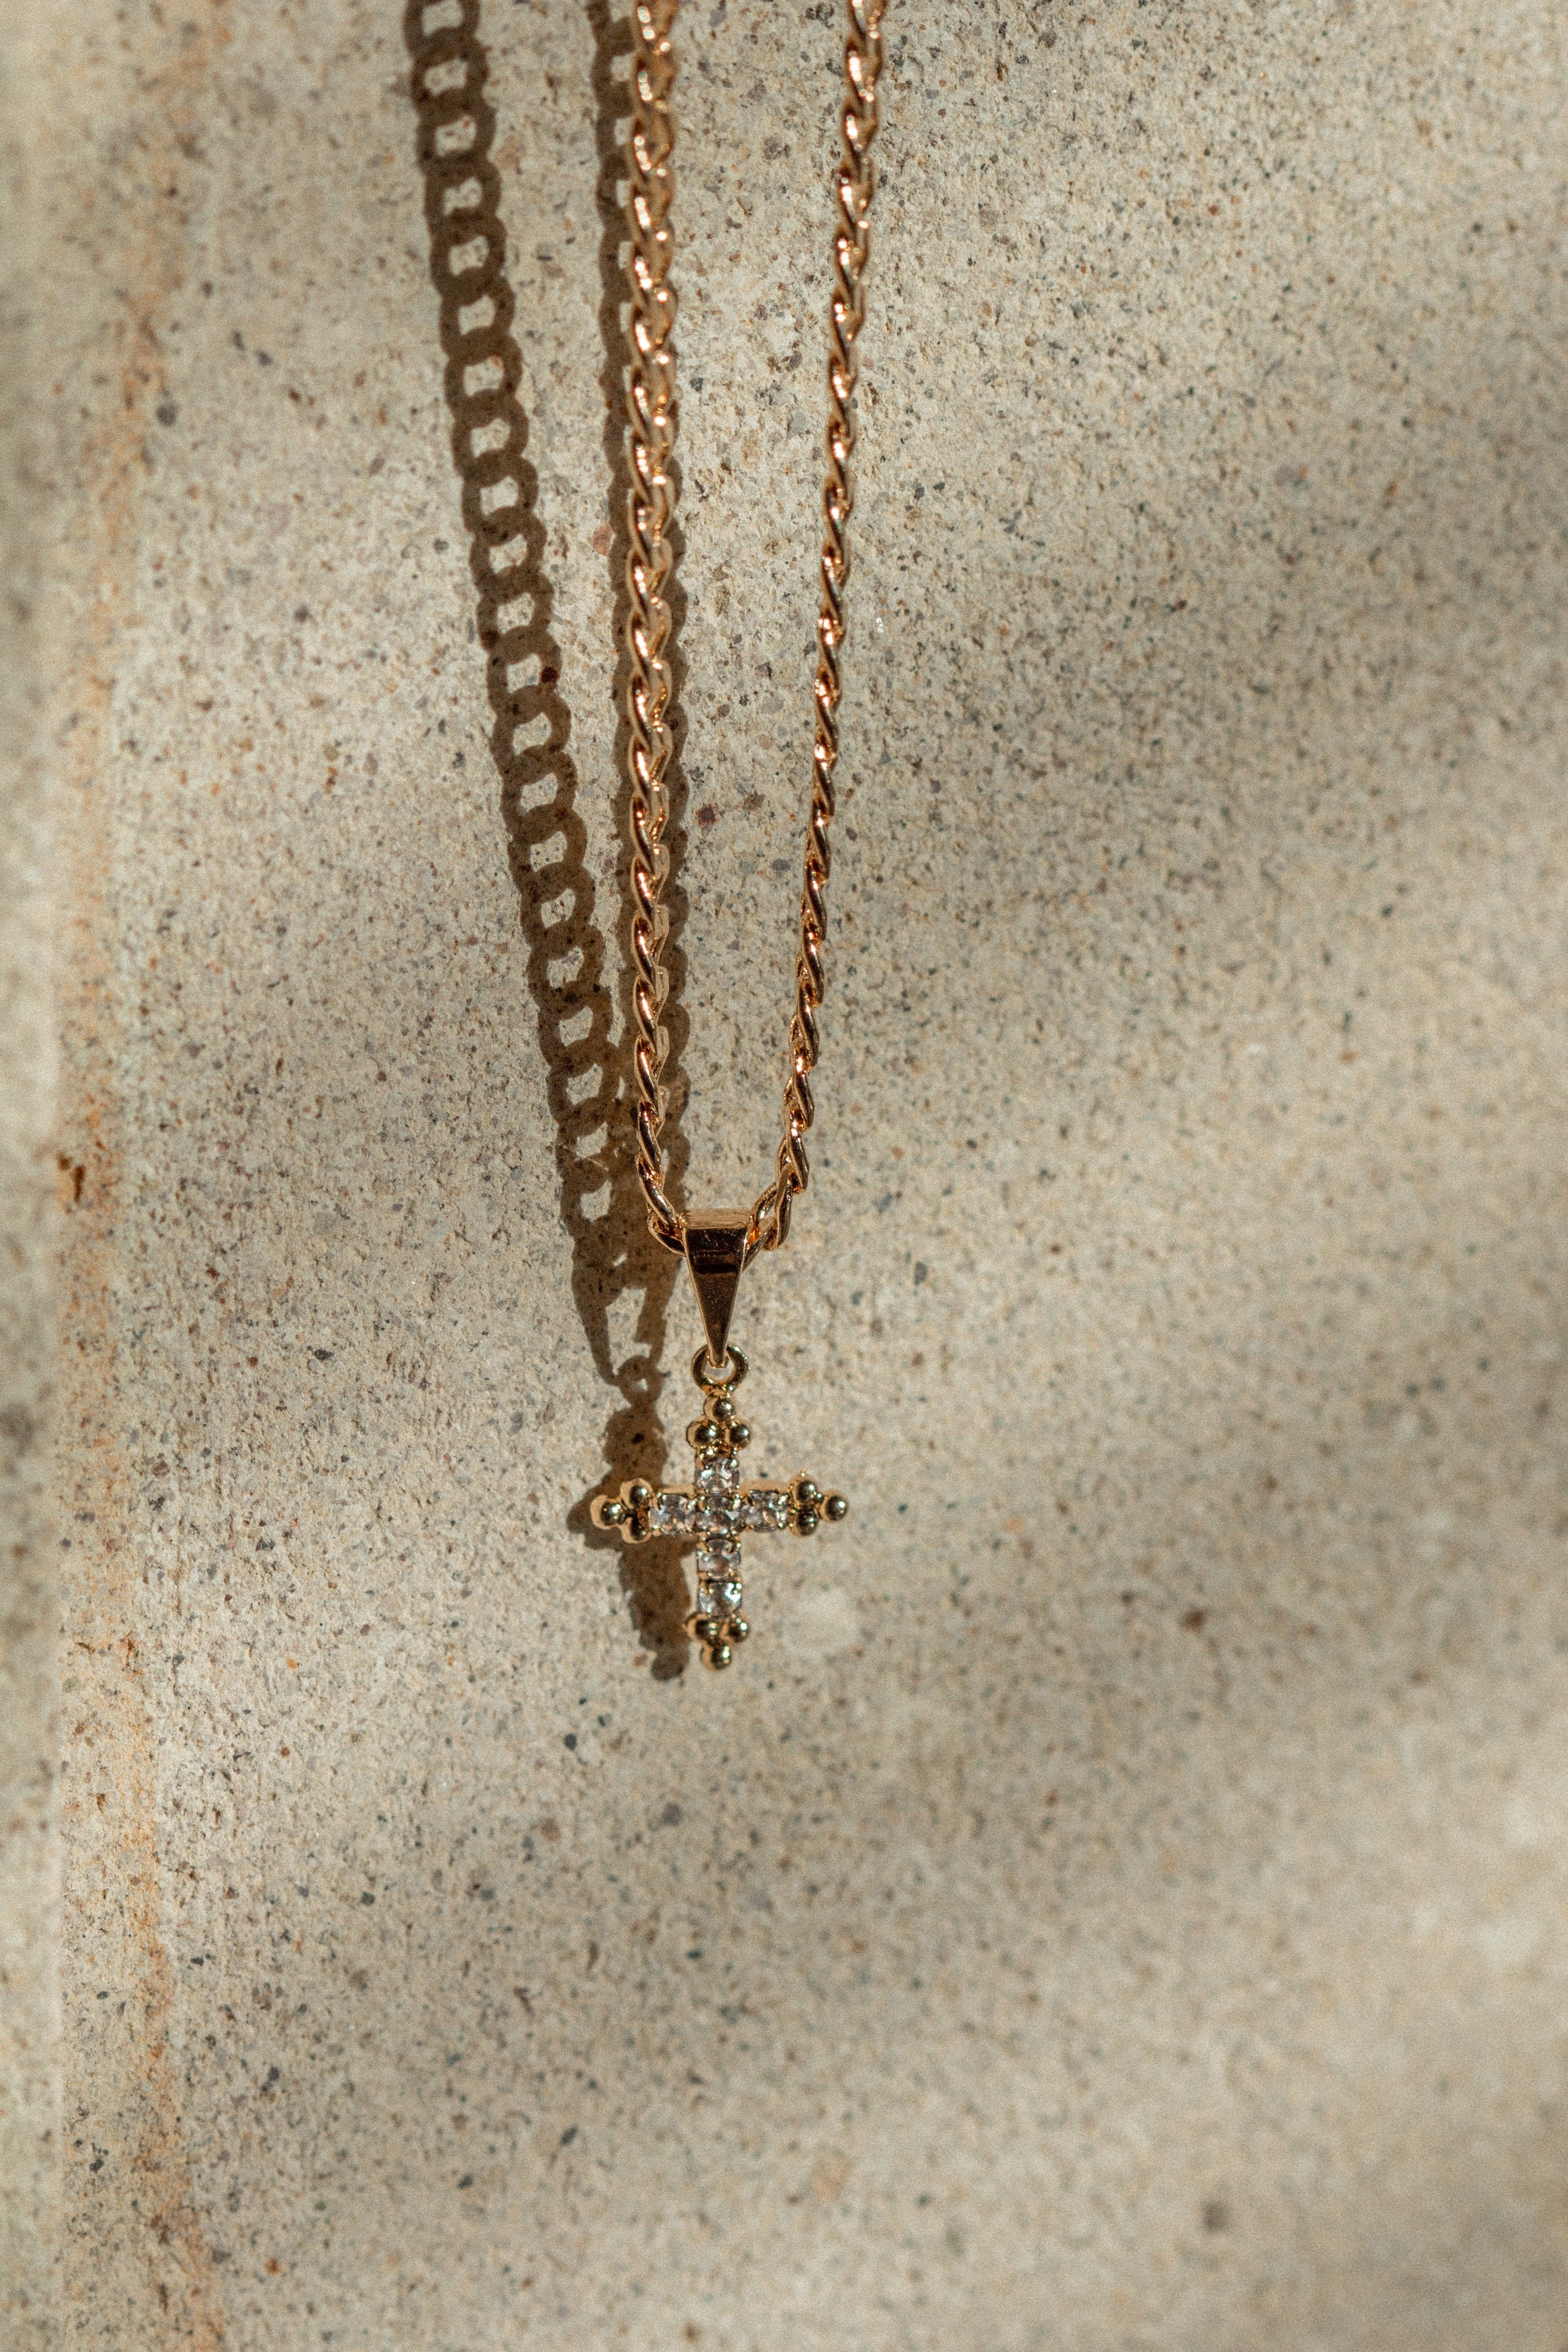 mini cross pendant, dainty cross necklace, cross charm pendant, gold cross necklace, small cross necklace, small cross pendant, gold filled necklace, gold filled pendant, gold filled cross, dainty cross, cz cross, cz cross necklace, dainty cross, gold dainty necklace, gold cross necklace, gold filled jewelry, layering necklace, layered necklace